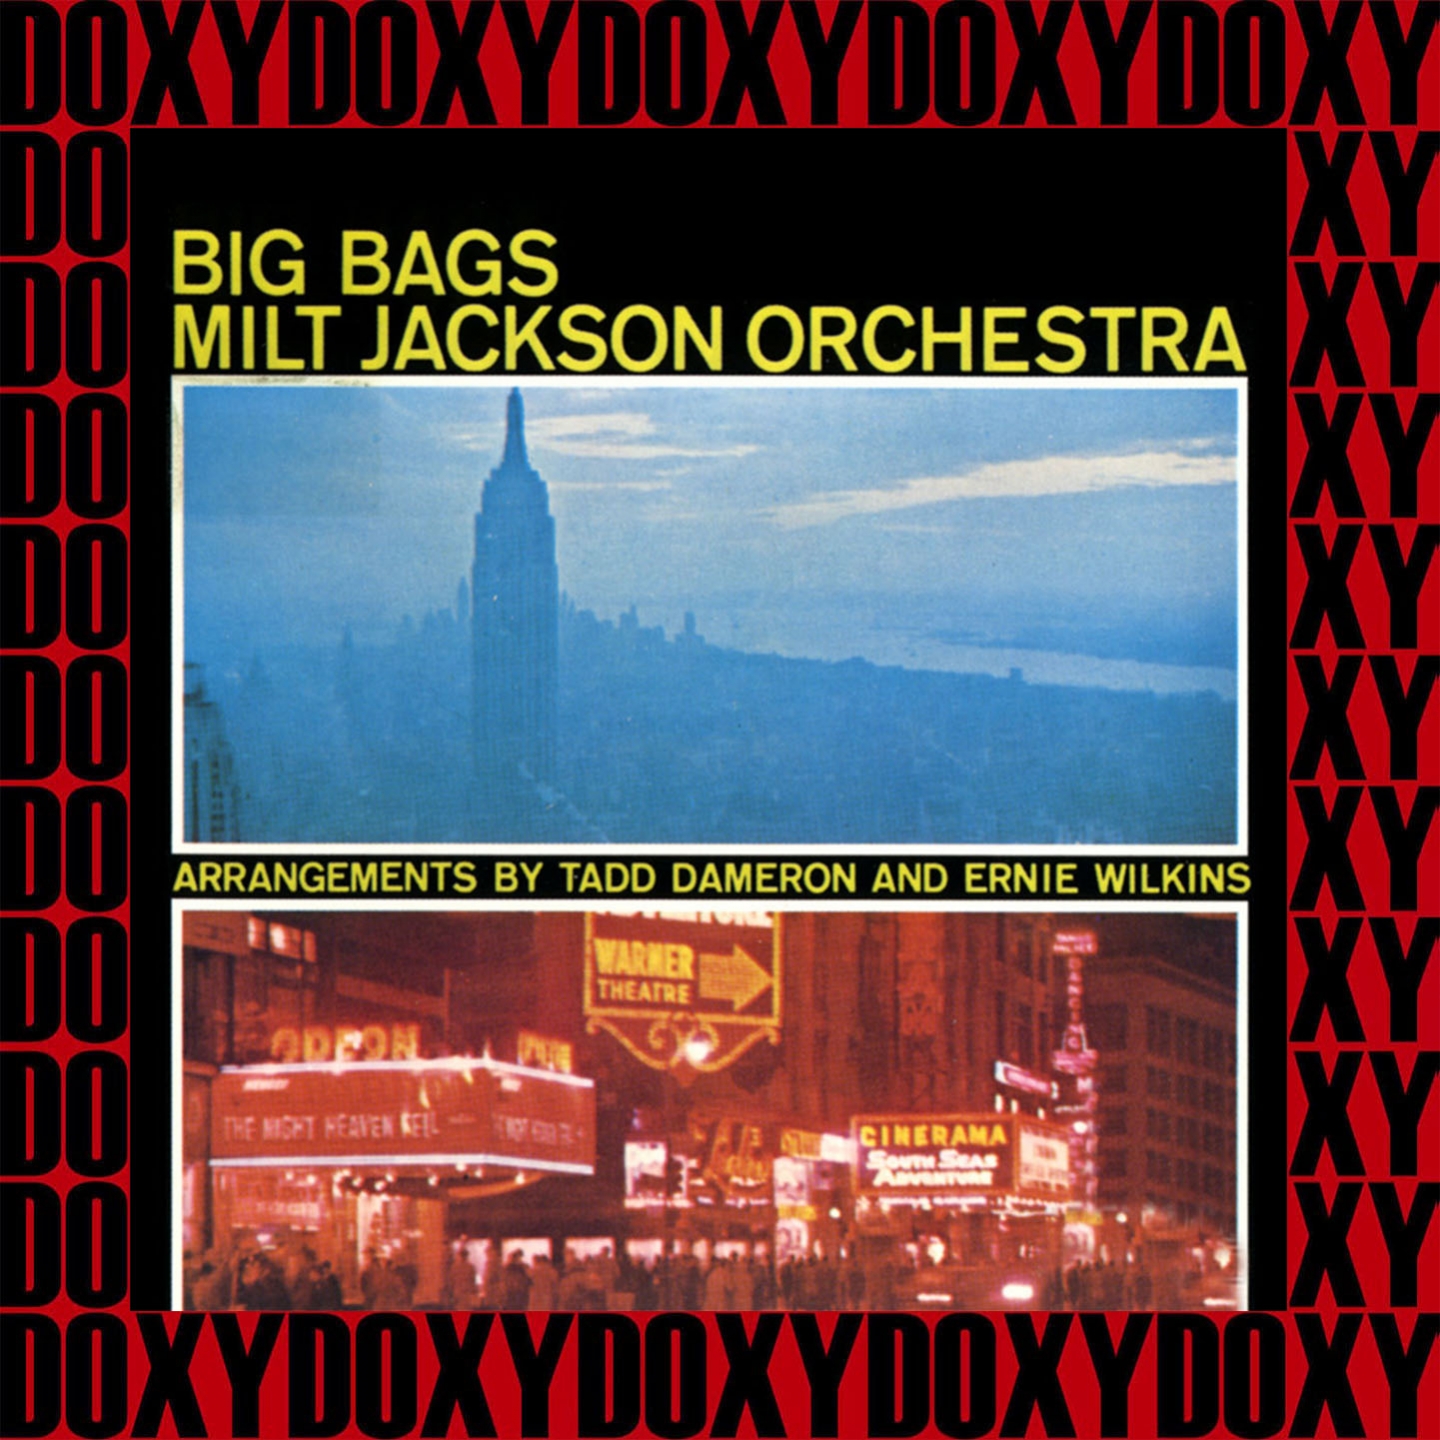 Big Bags, The Complete Sessions (Remastered Version) (Doxy Collection)